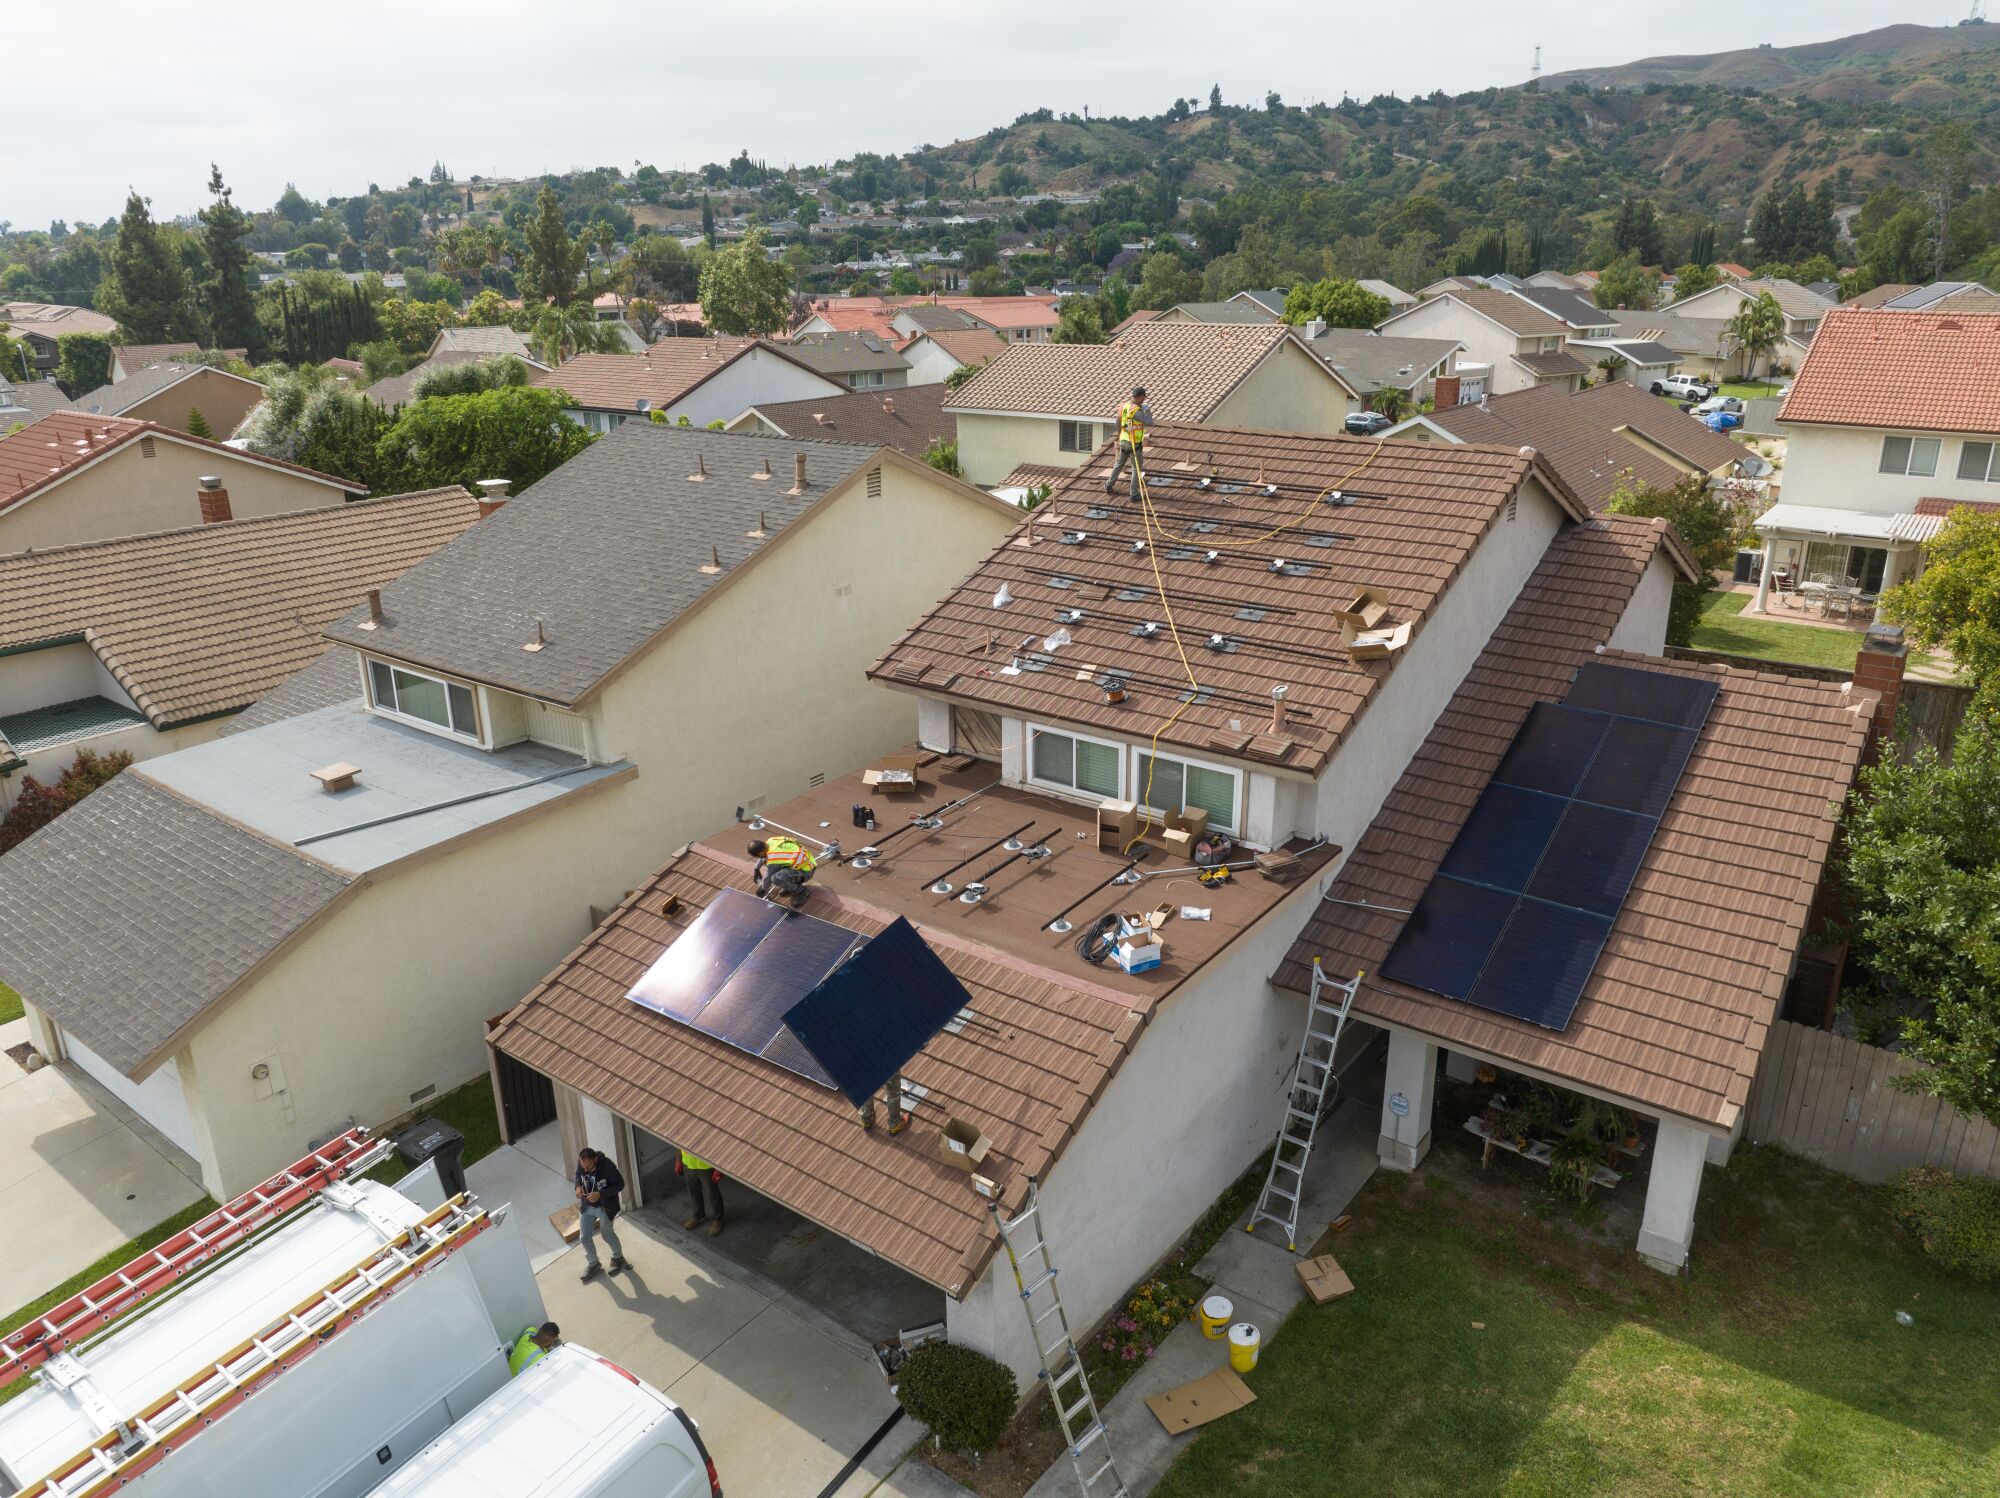 A house in Brea, CA gets solar panels installed on Thursday, June 15, 2023.